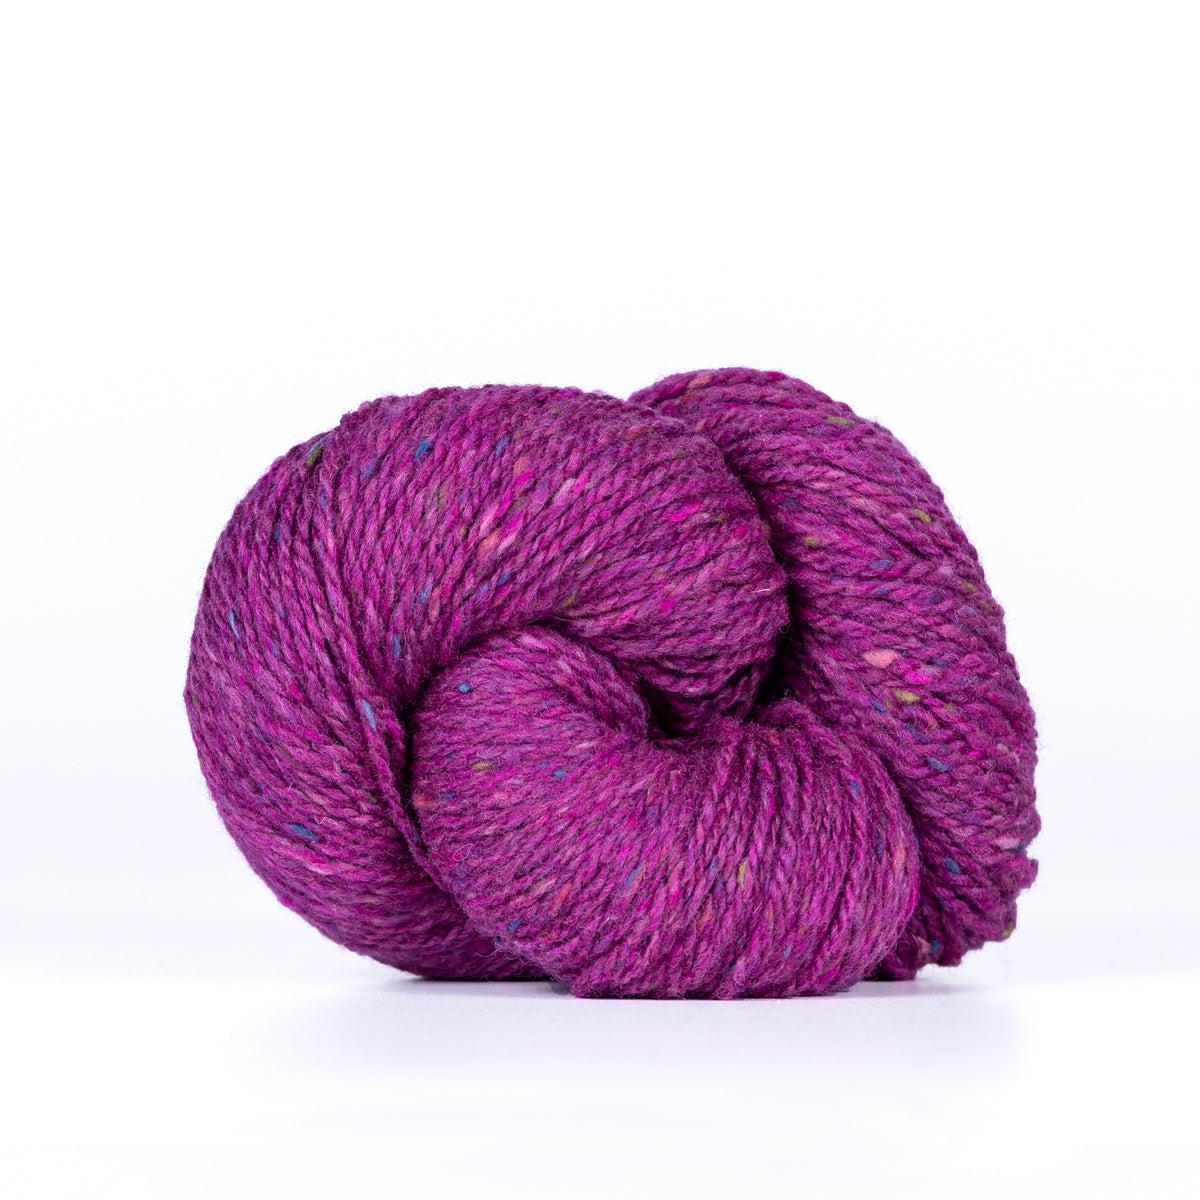 A skein of Kelbourne Woolens Lucky Tweed Magenta, a bright pink purple with pink, blue and yellow flecks.